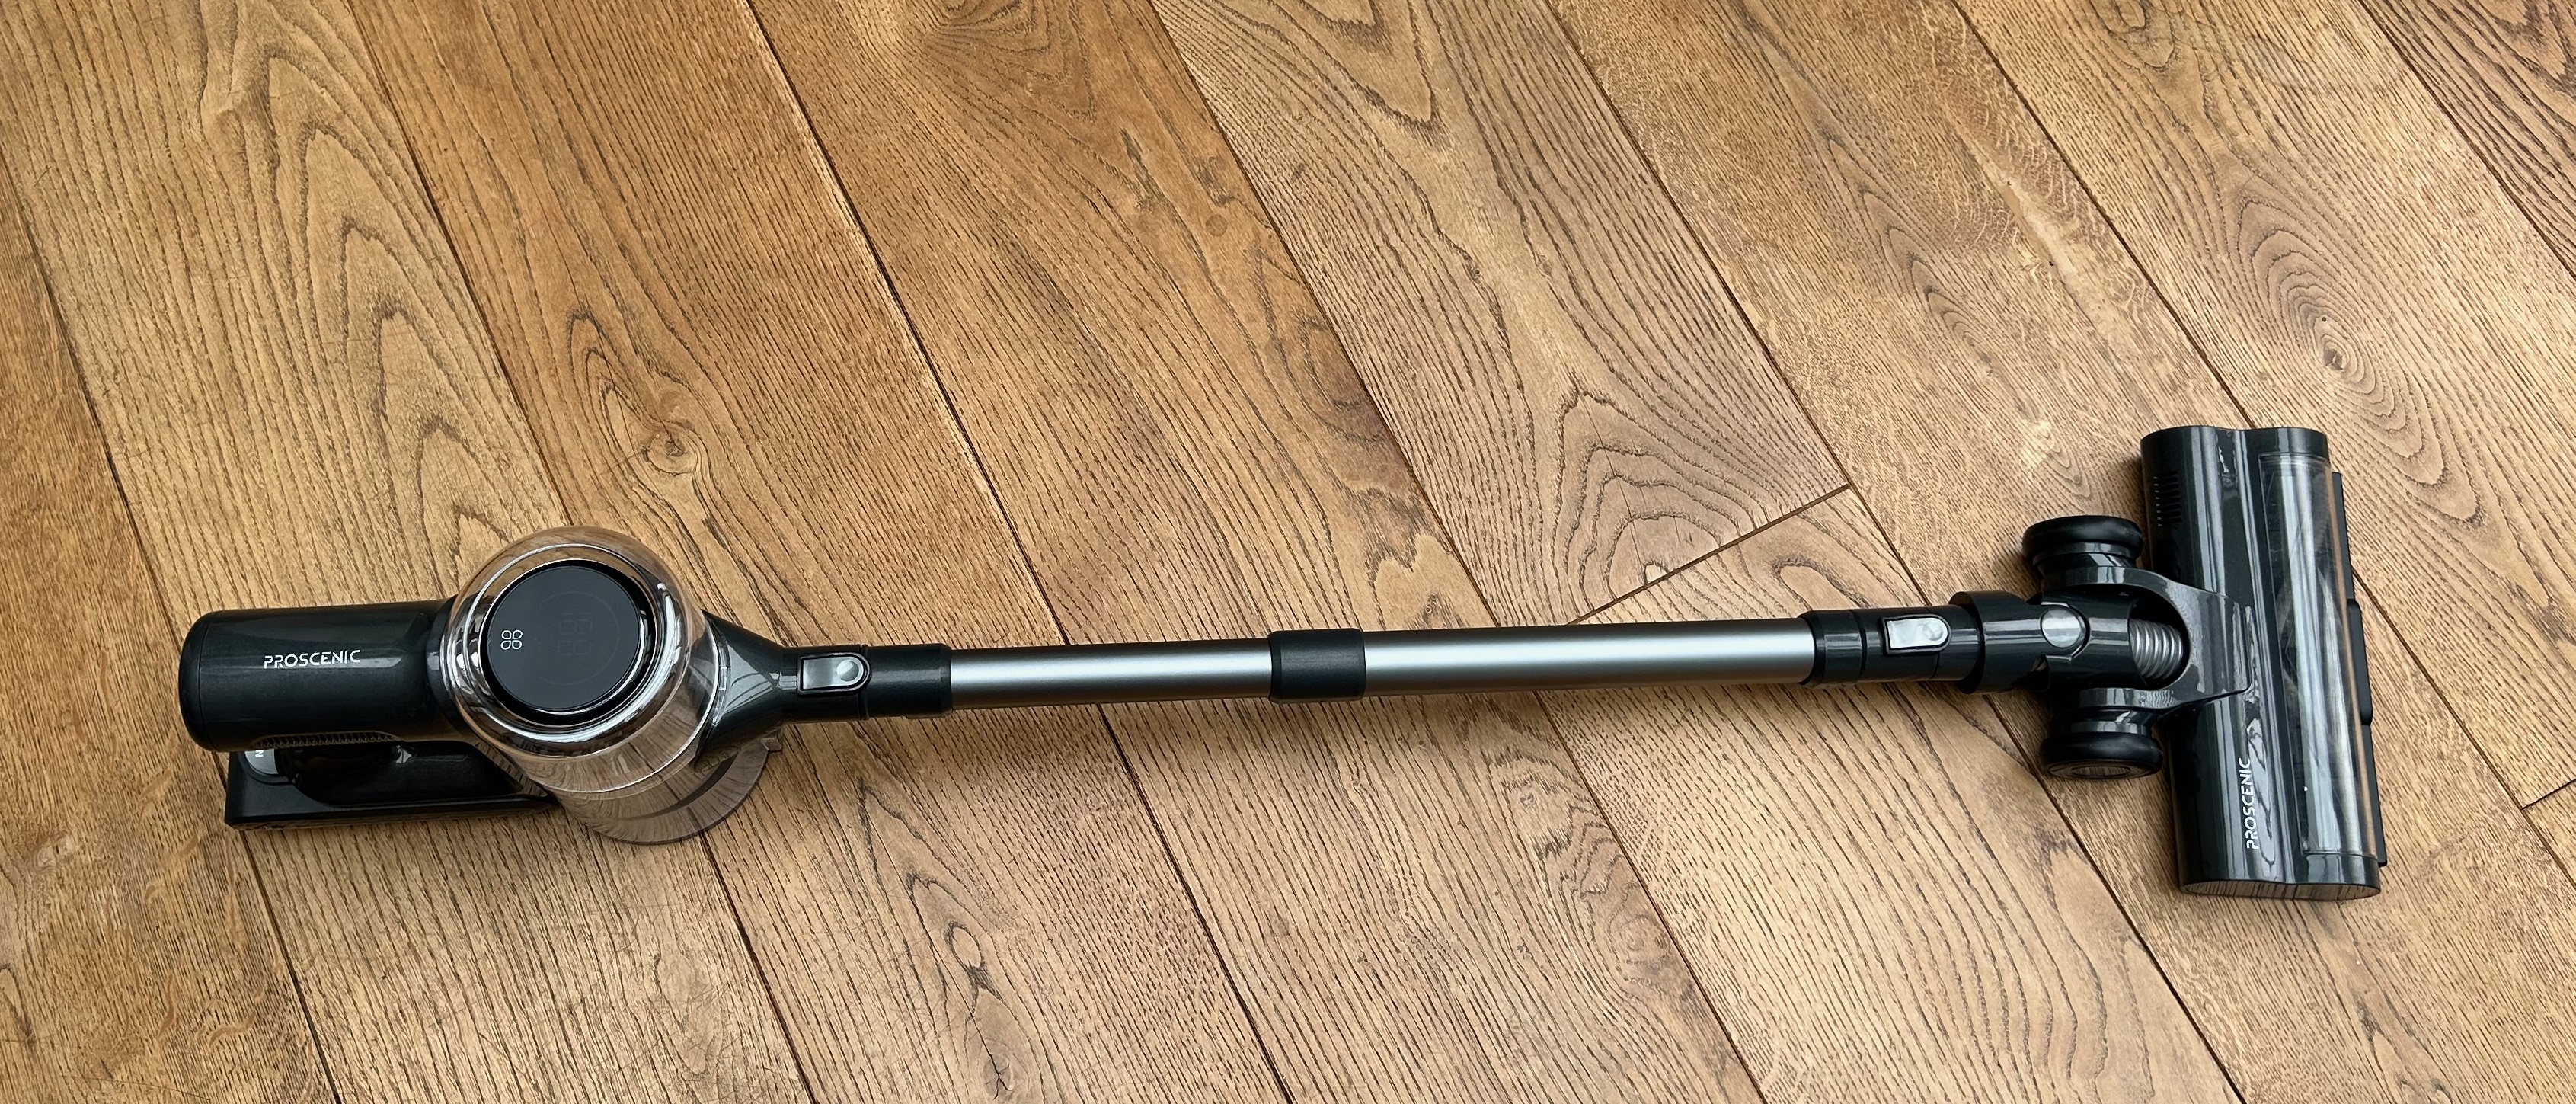 Proscenic P12 review: a reasonably priced cordless vacuum